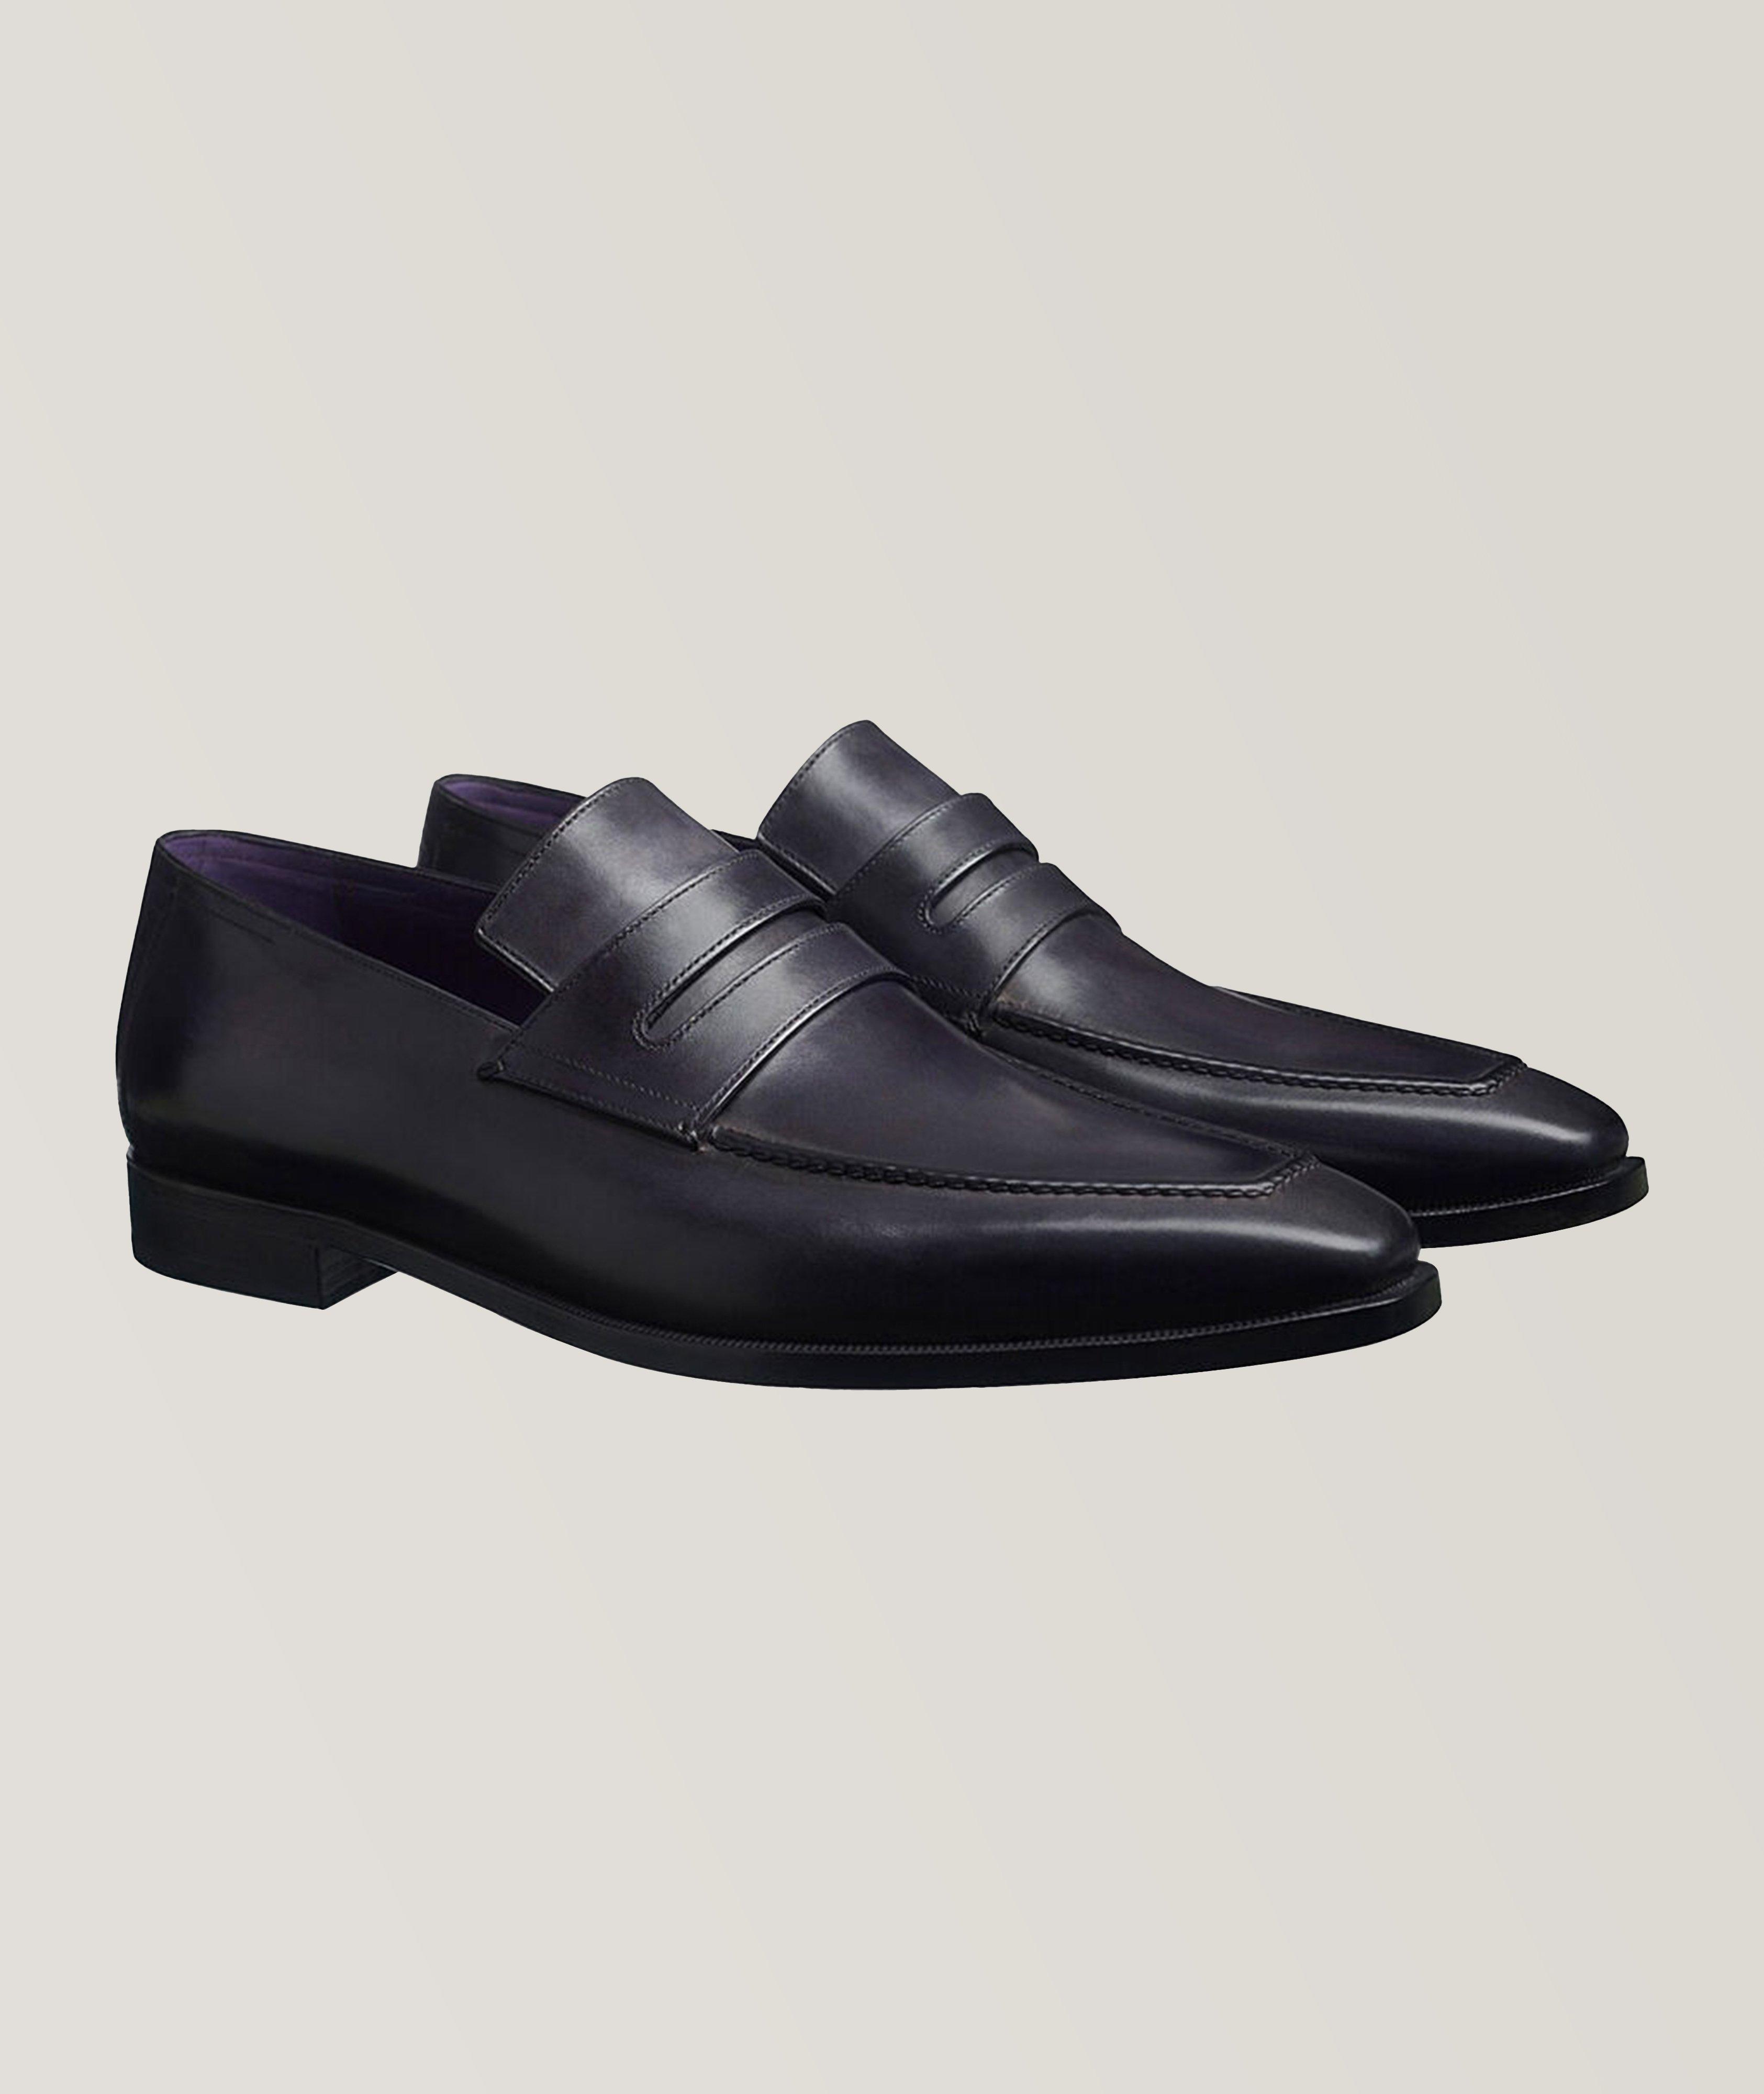 Andy Demesure Leather Loafer image 1